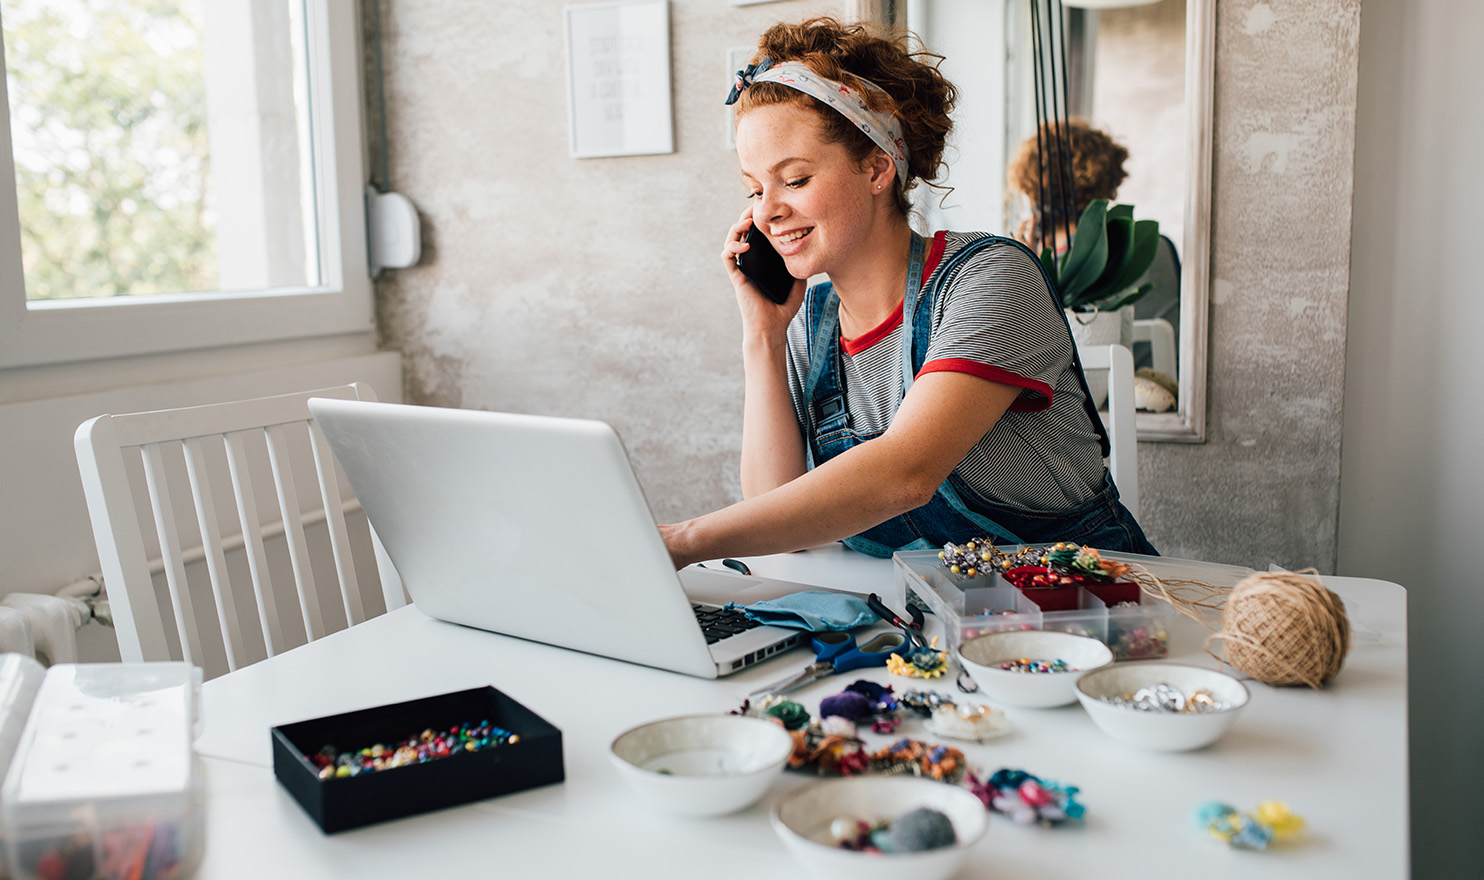 A young craft jeweler is speaking on the phone to her agent about product liability insurance as she works on her pieces next her laptop on a white table in her beige colored home office.